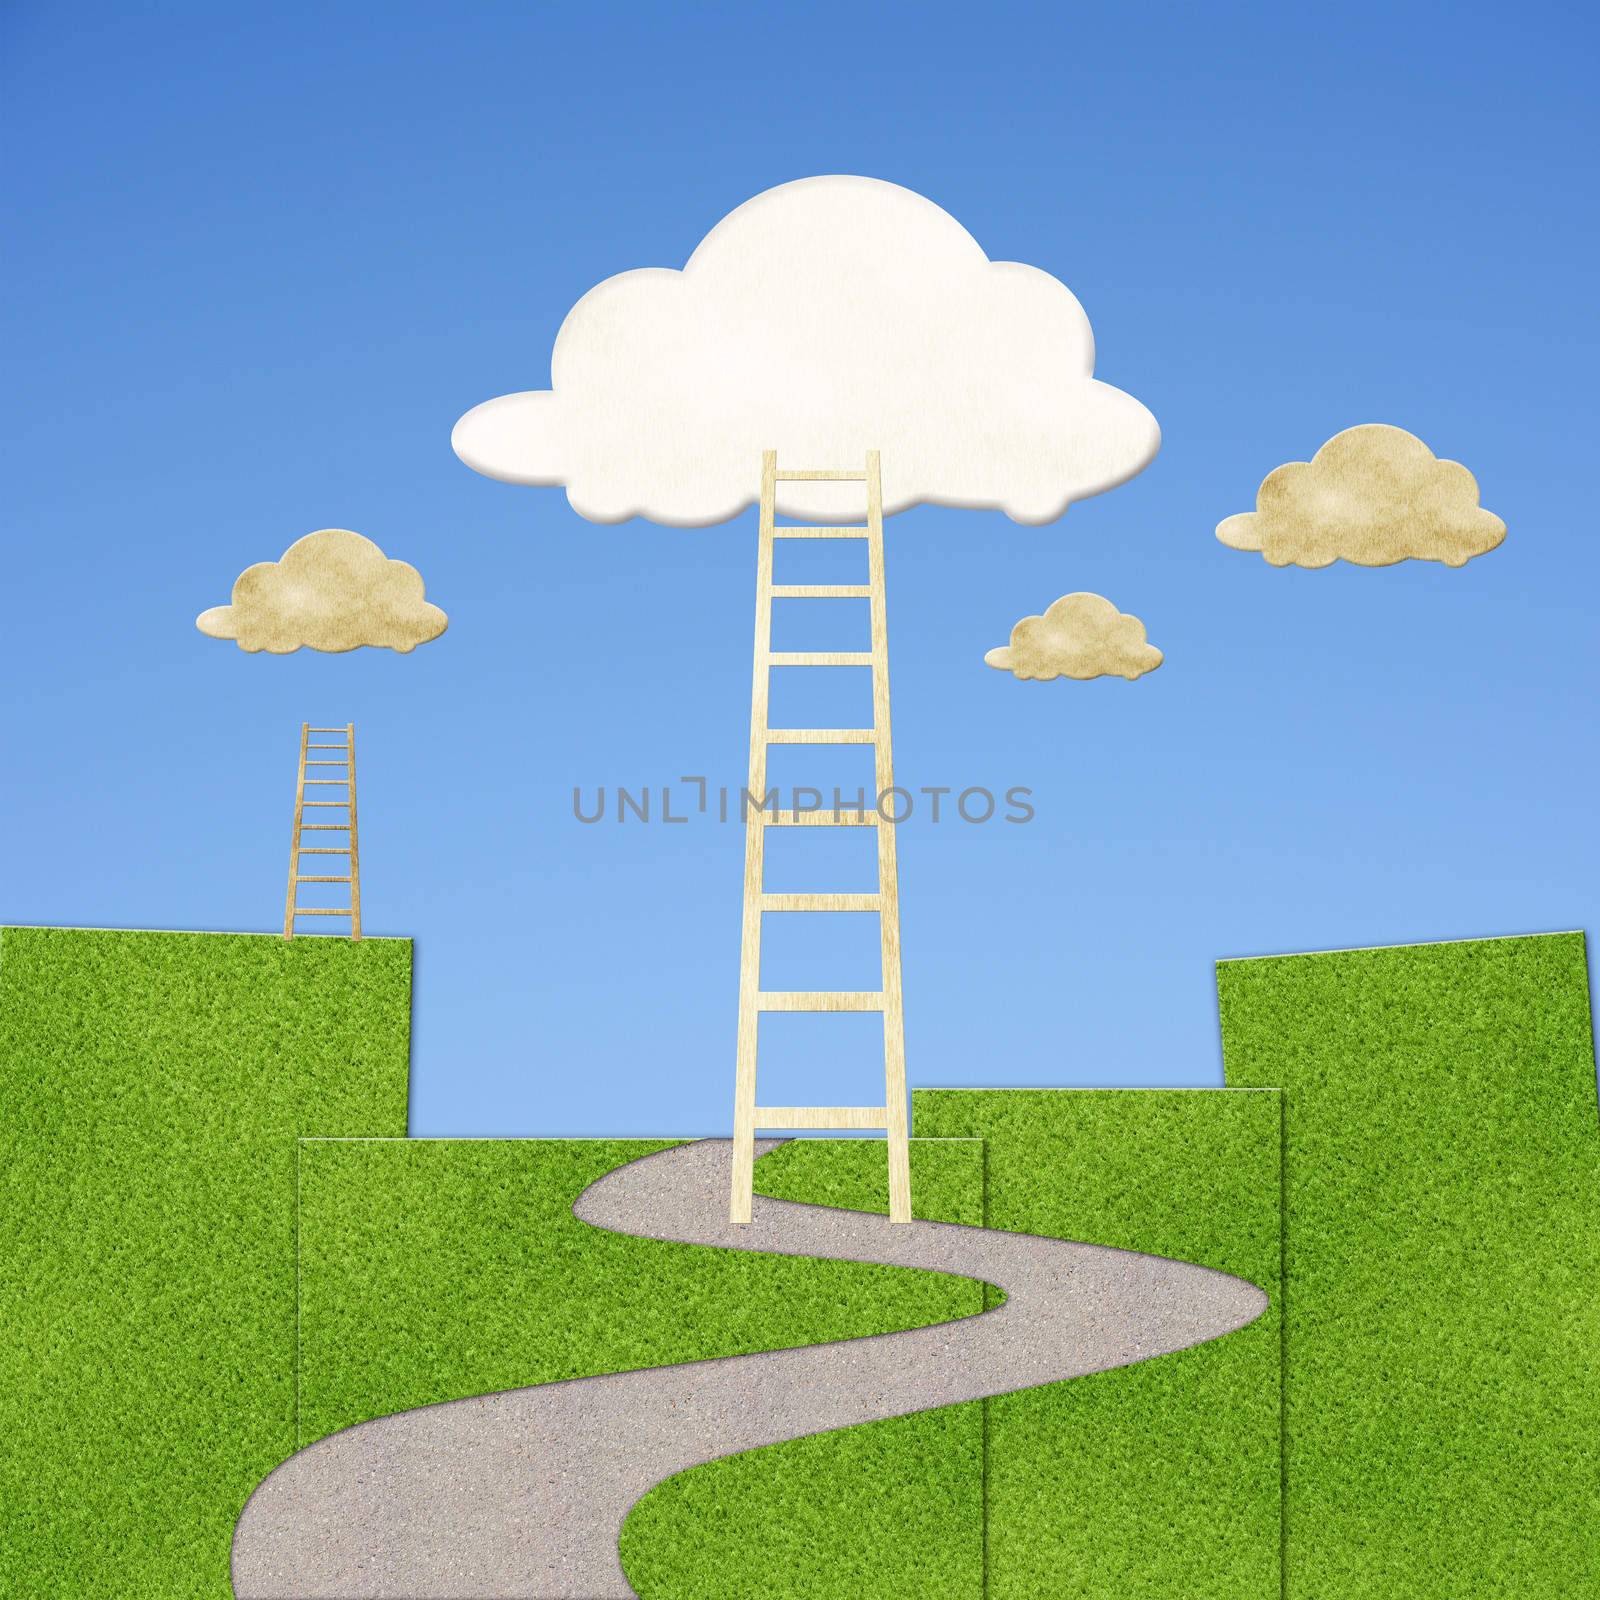 Clouds with ladder over grassland and road, concept about clouds, competition, successful etc.